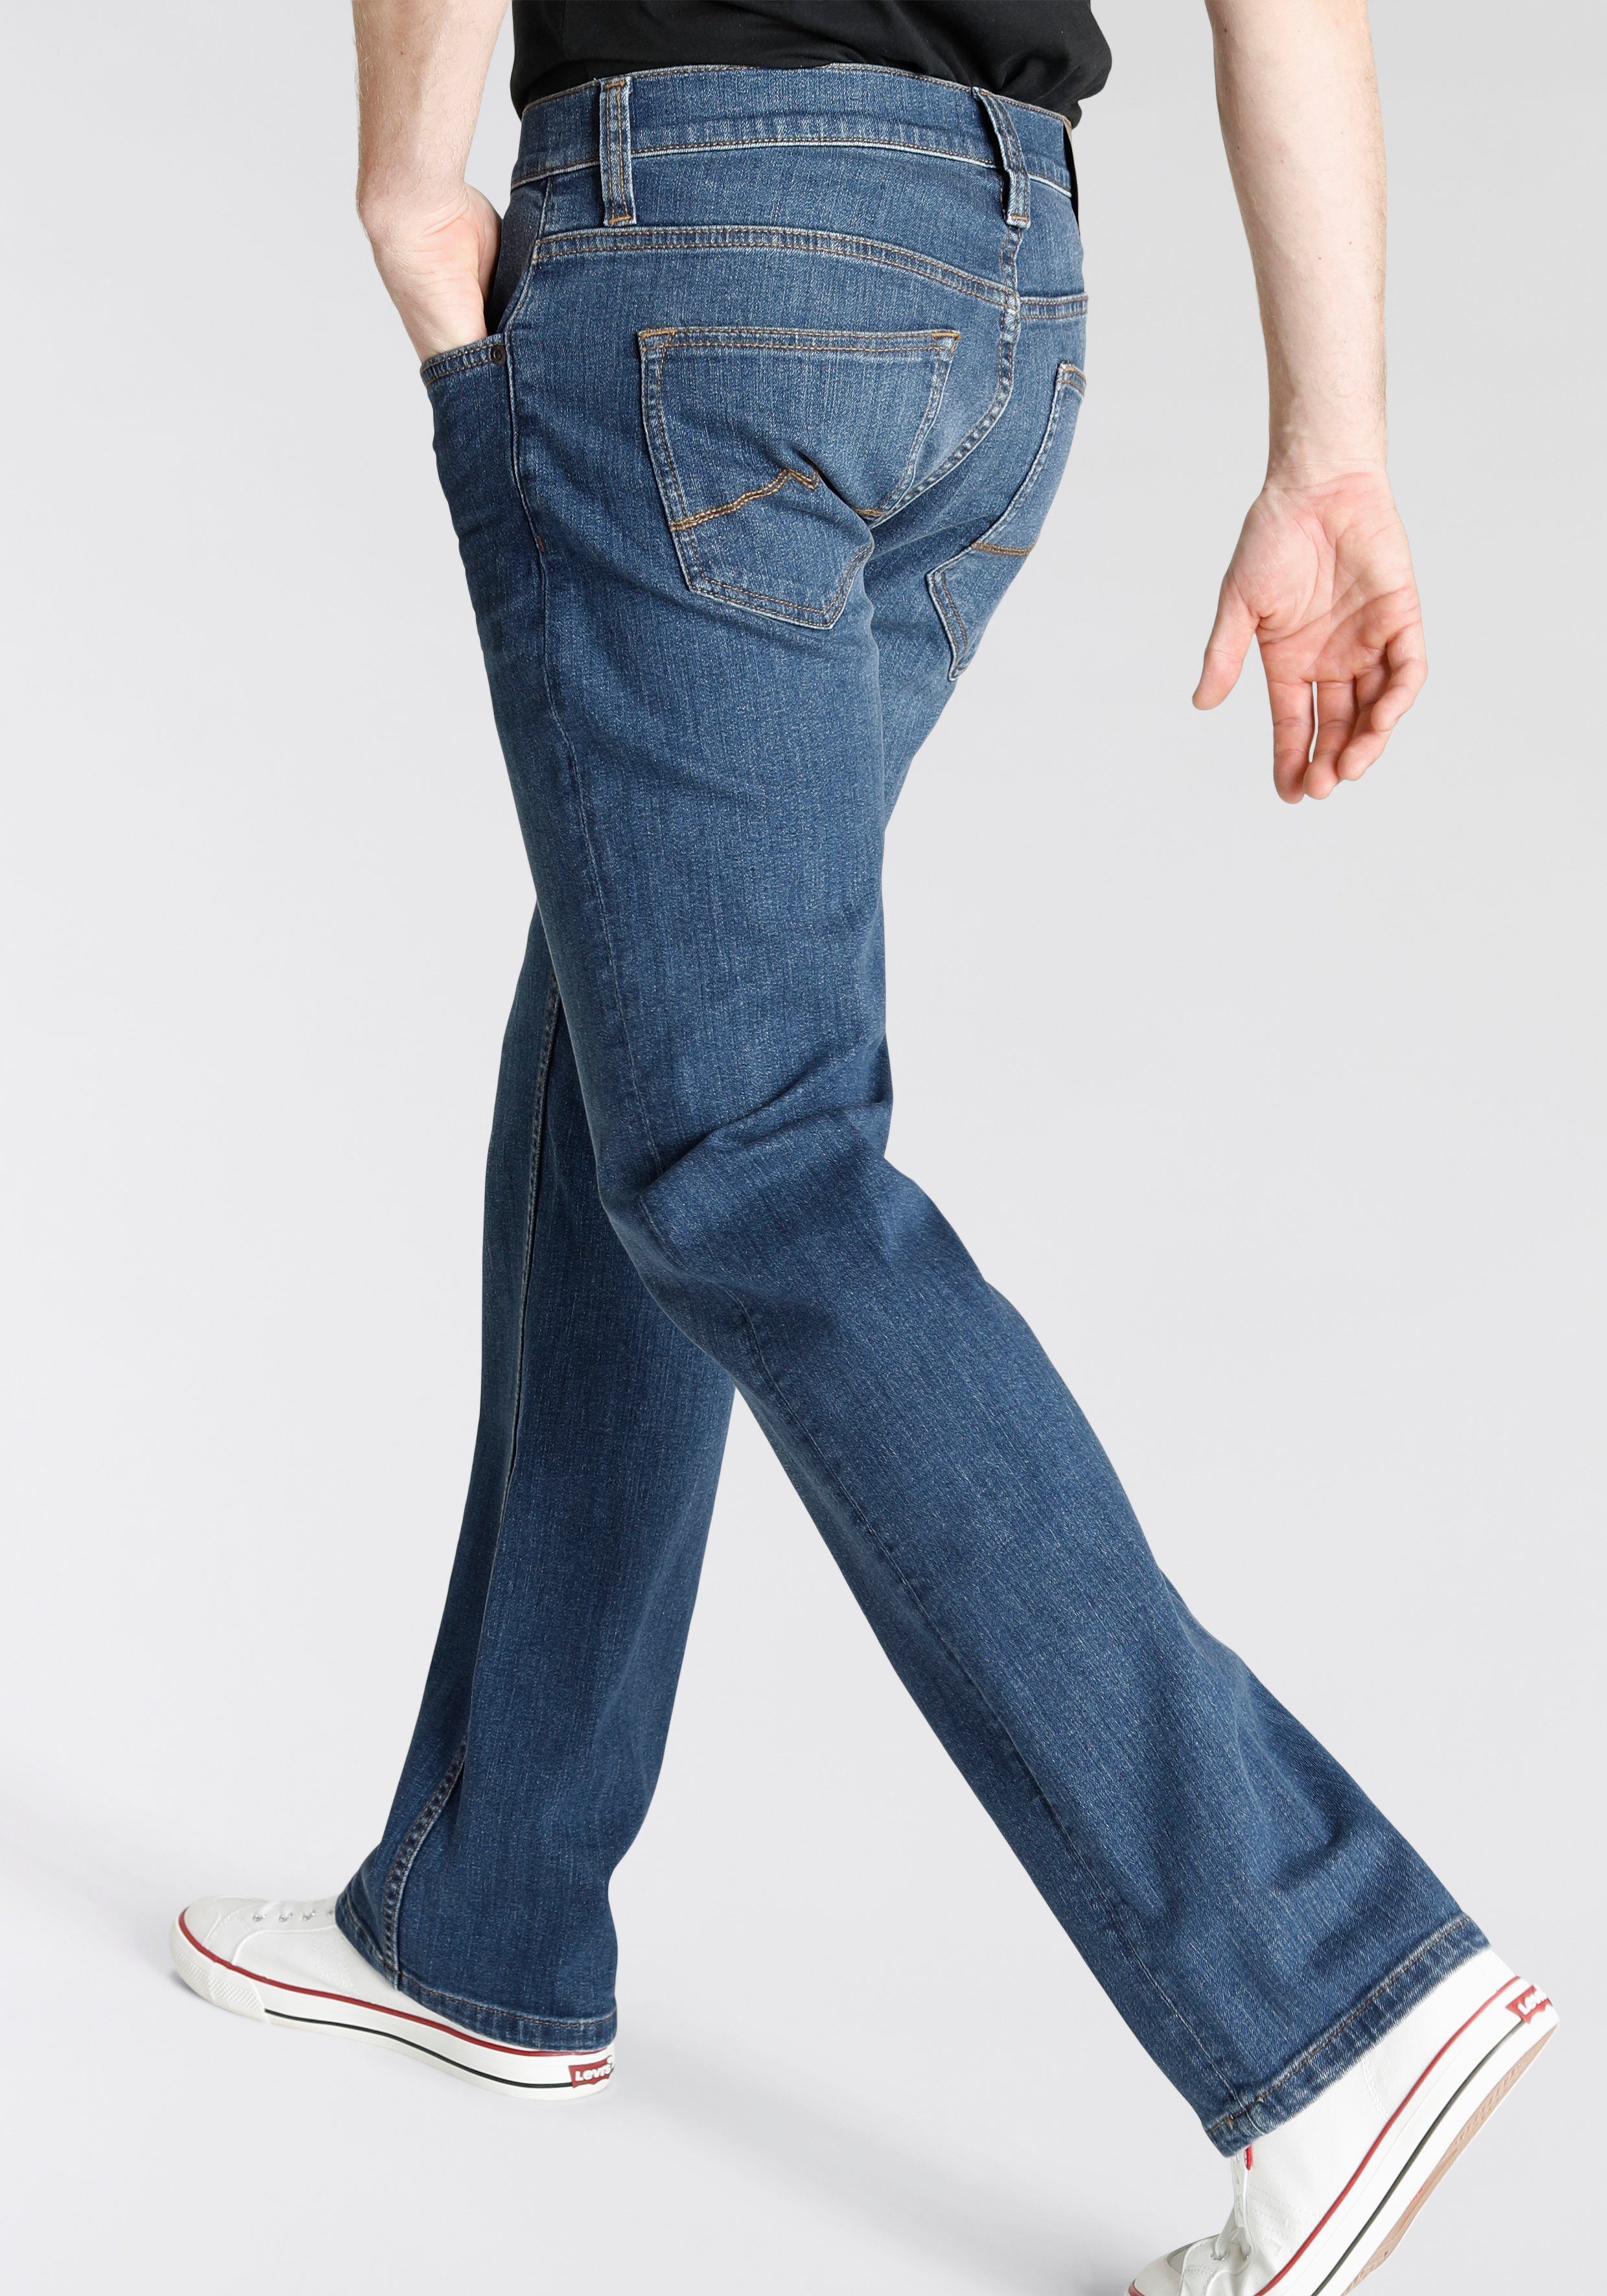 MUSTANG Bootcut-Jeans STYLE BOOTCUT wash OREGON dark blue